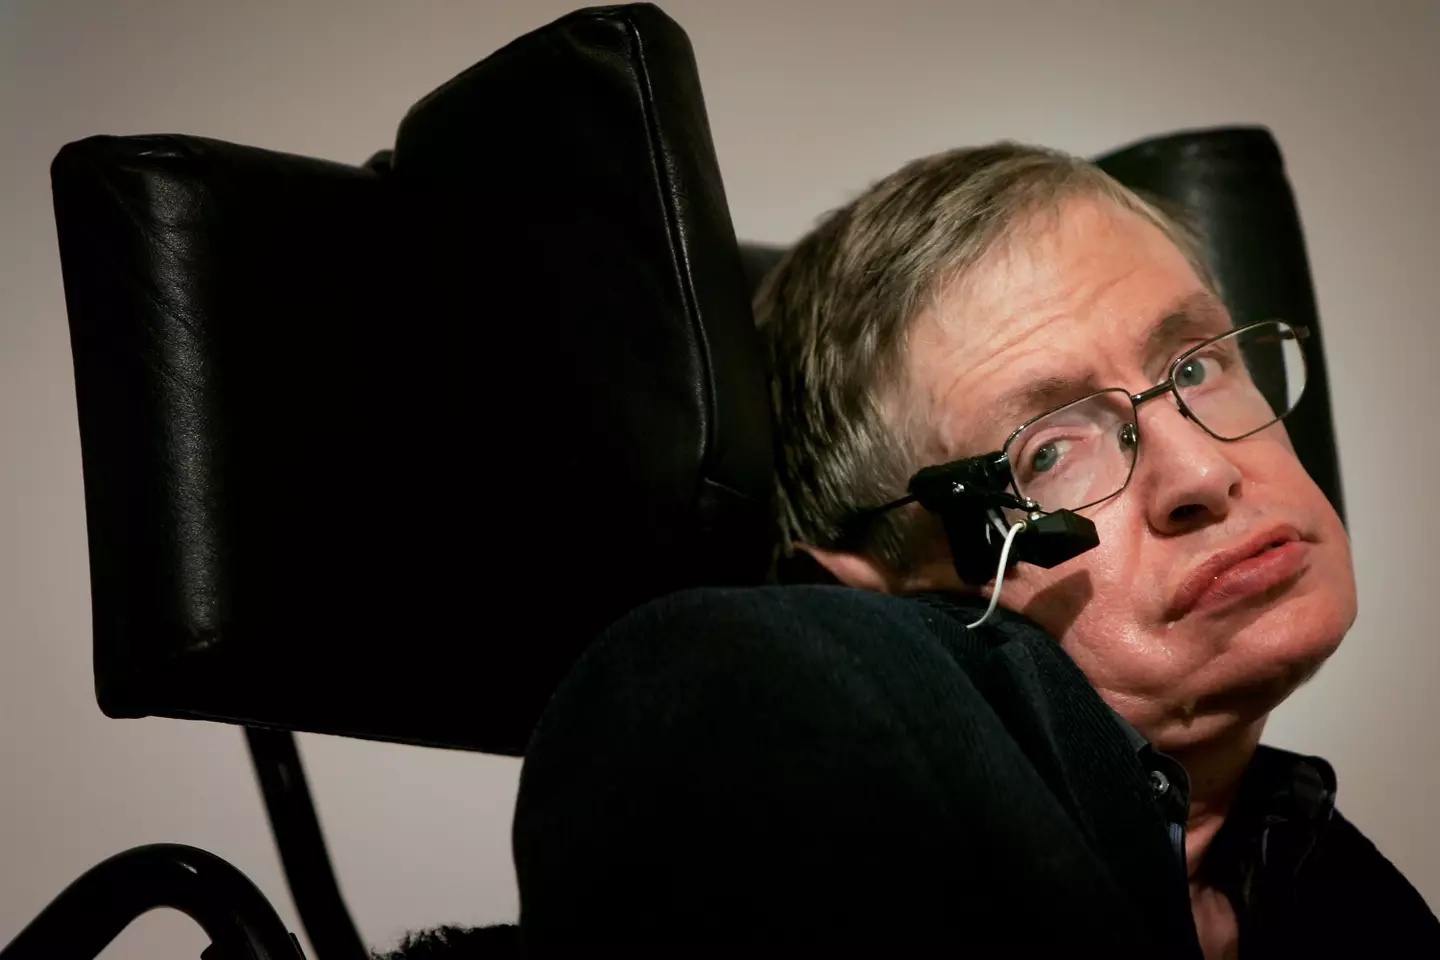 World-renowned scientist Stephen Hawking once faked his own death in a BBC interview.